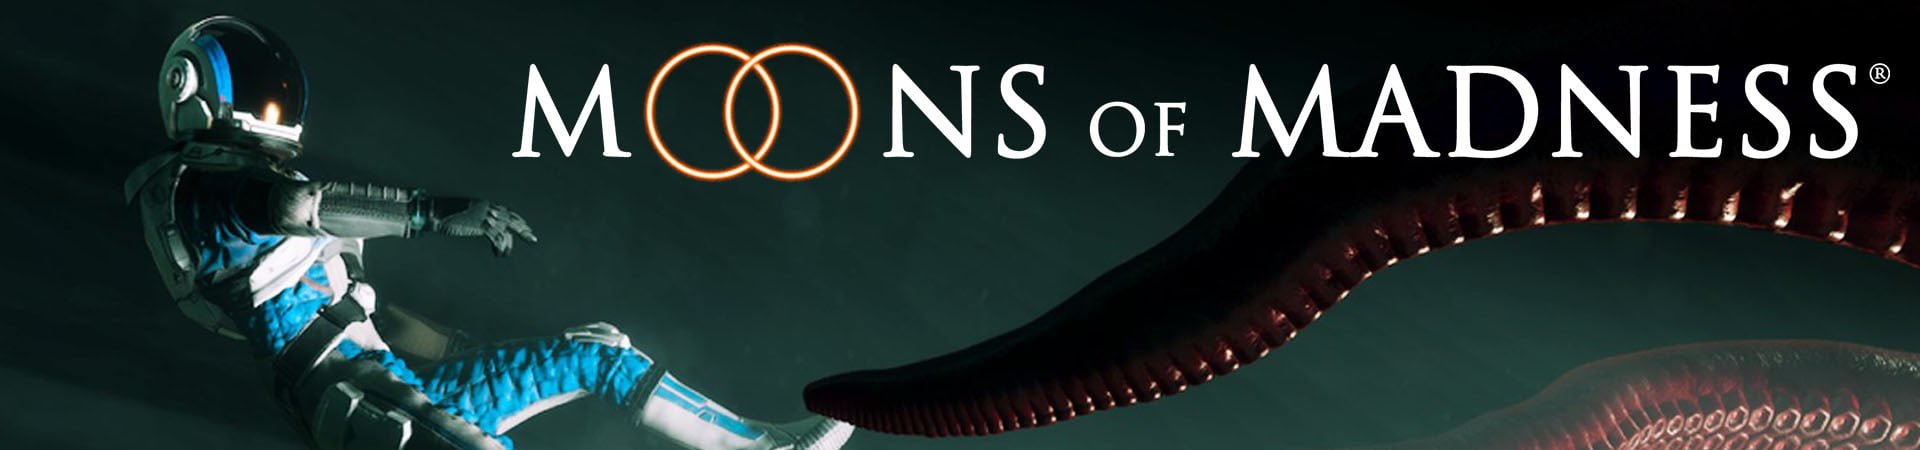 moons-of-madness-banner.jpg